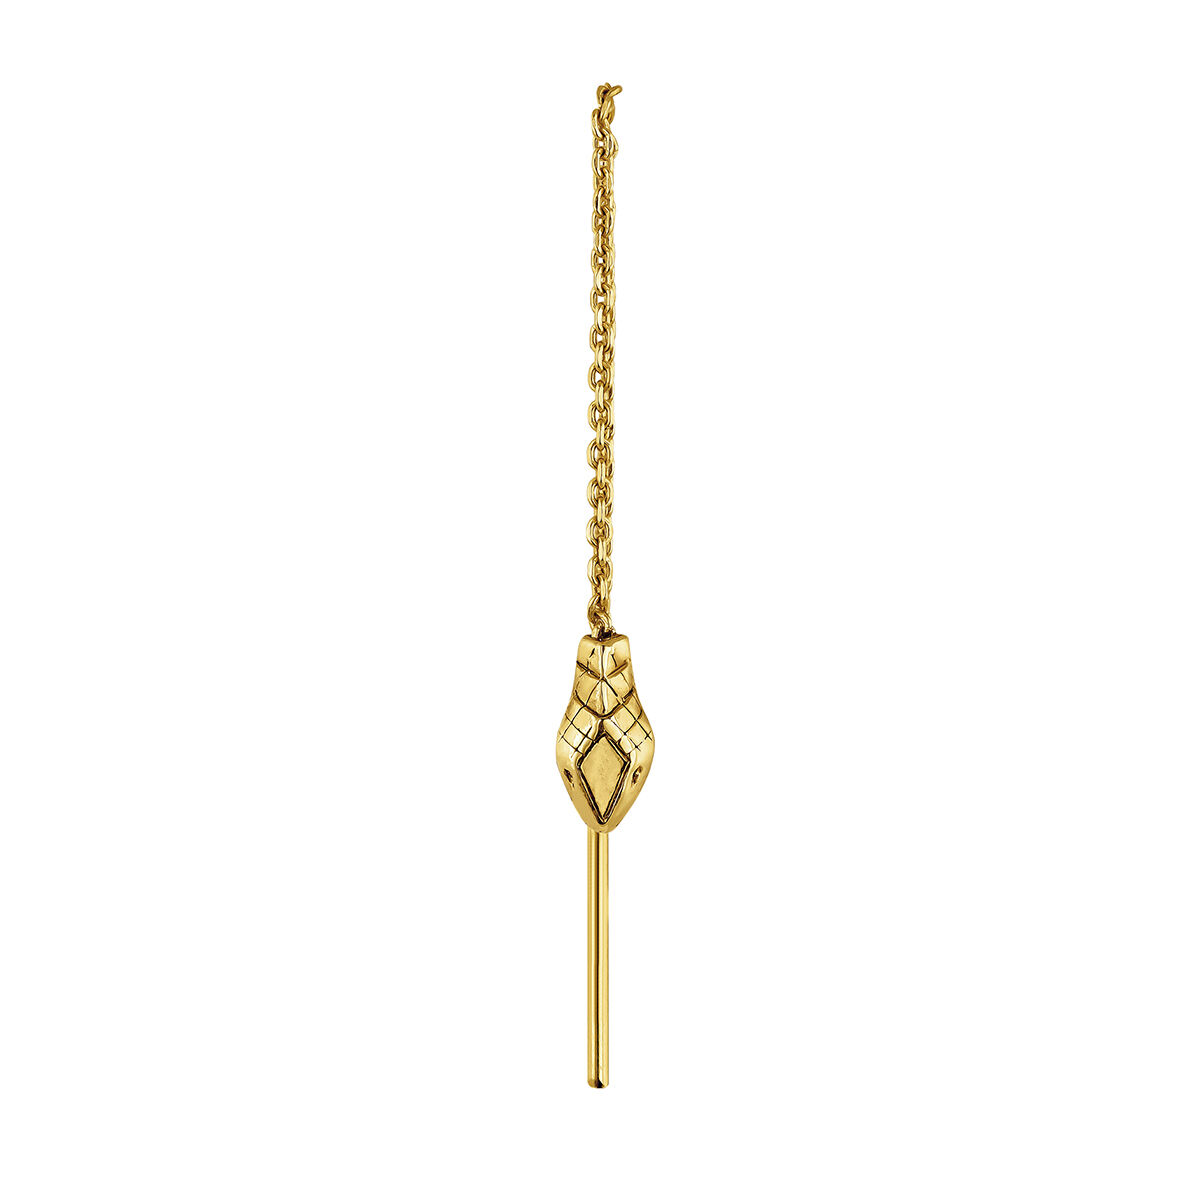 Single long chain earring in 18k yellow gold-plated silver with snake head, J04854-02-H, mainproduct